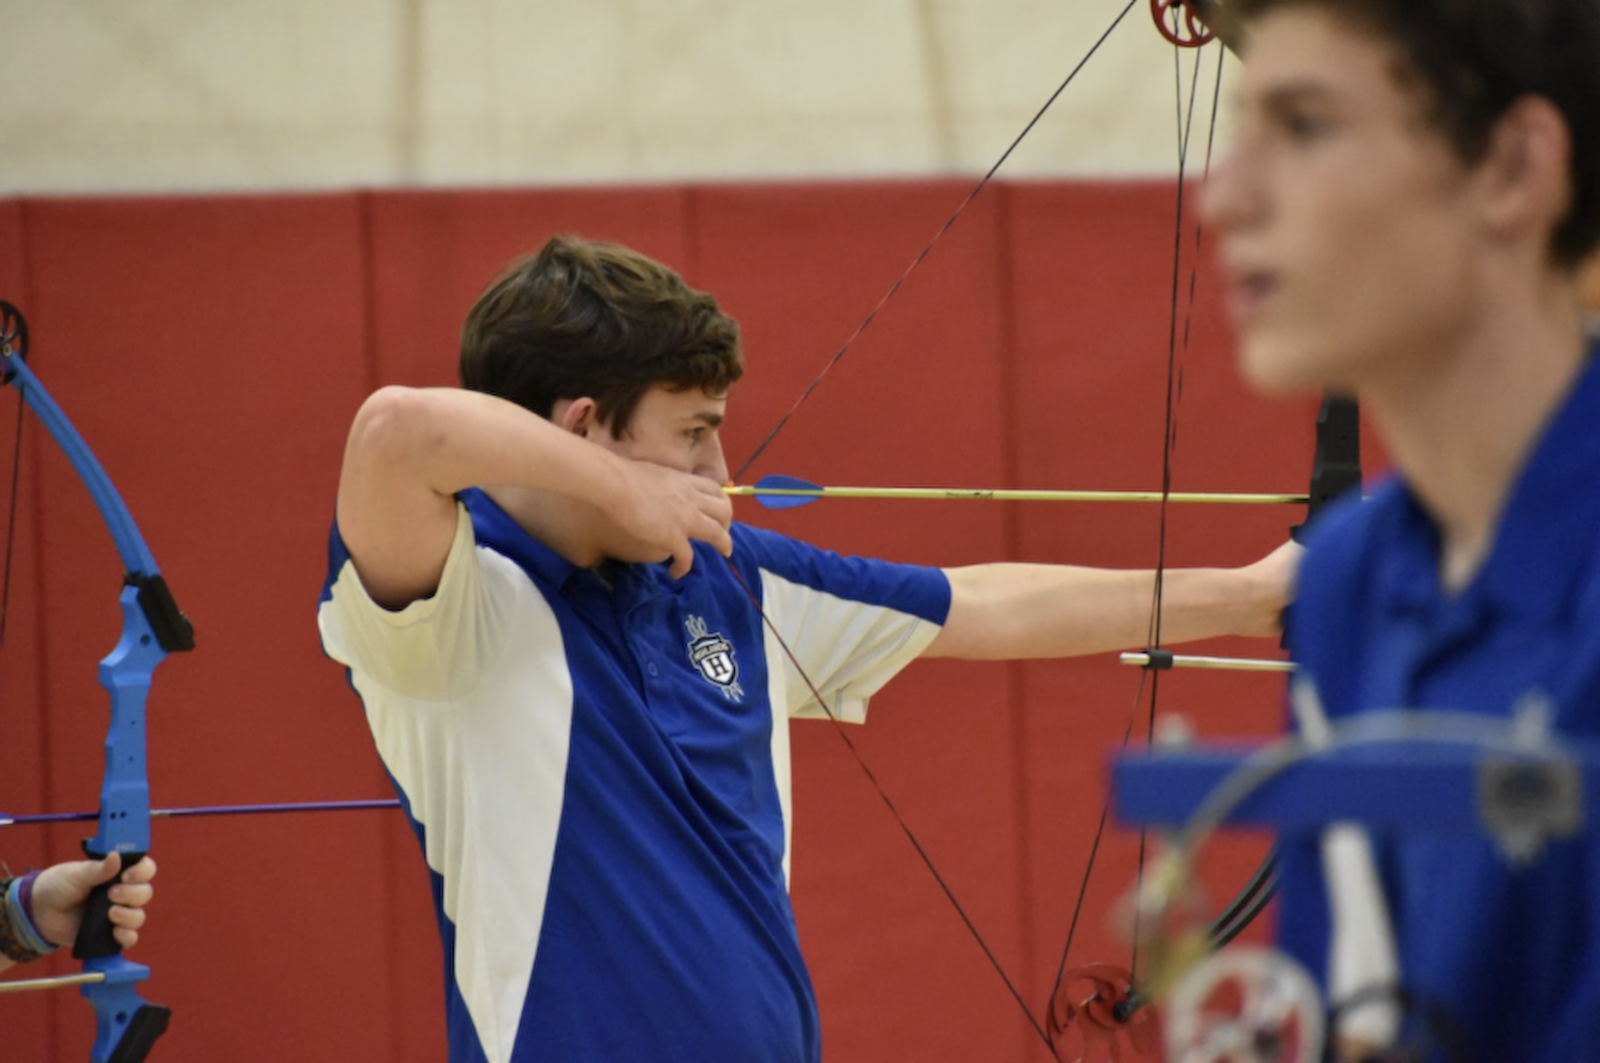 HHS archery Birds take third at the Camp Ernst Middle School shootout cover photo